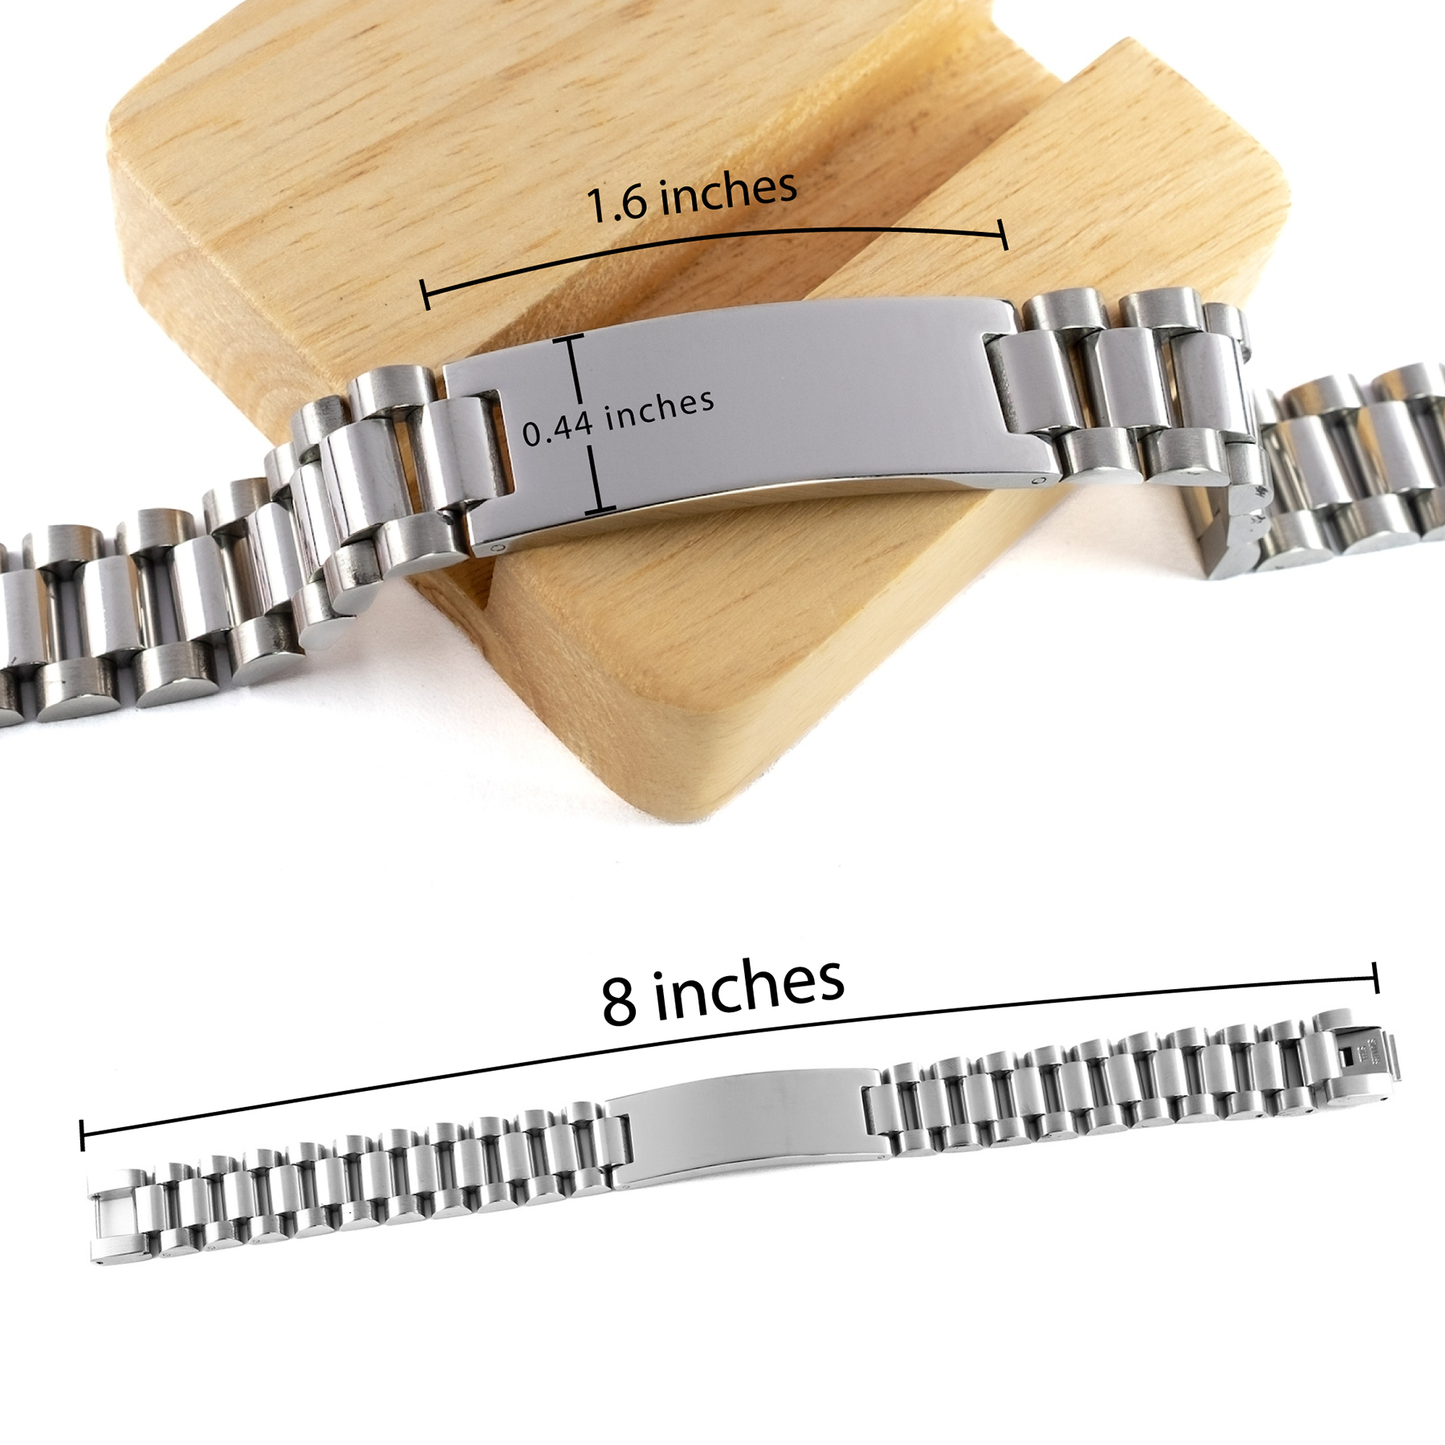 Niece Motivational Gifts from Aunt, Remember to never give up no matter what, Inspirational Birthday Ladder Stainless Steel Bracelet for Niece